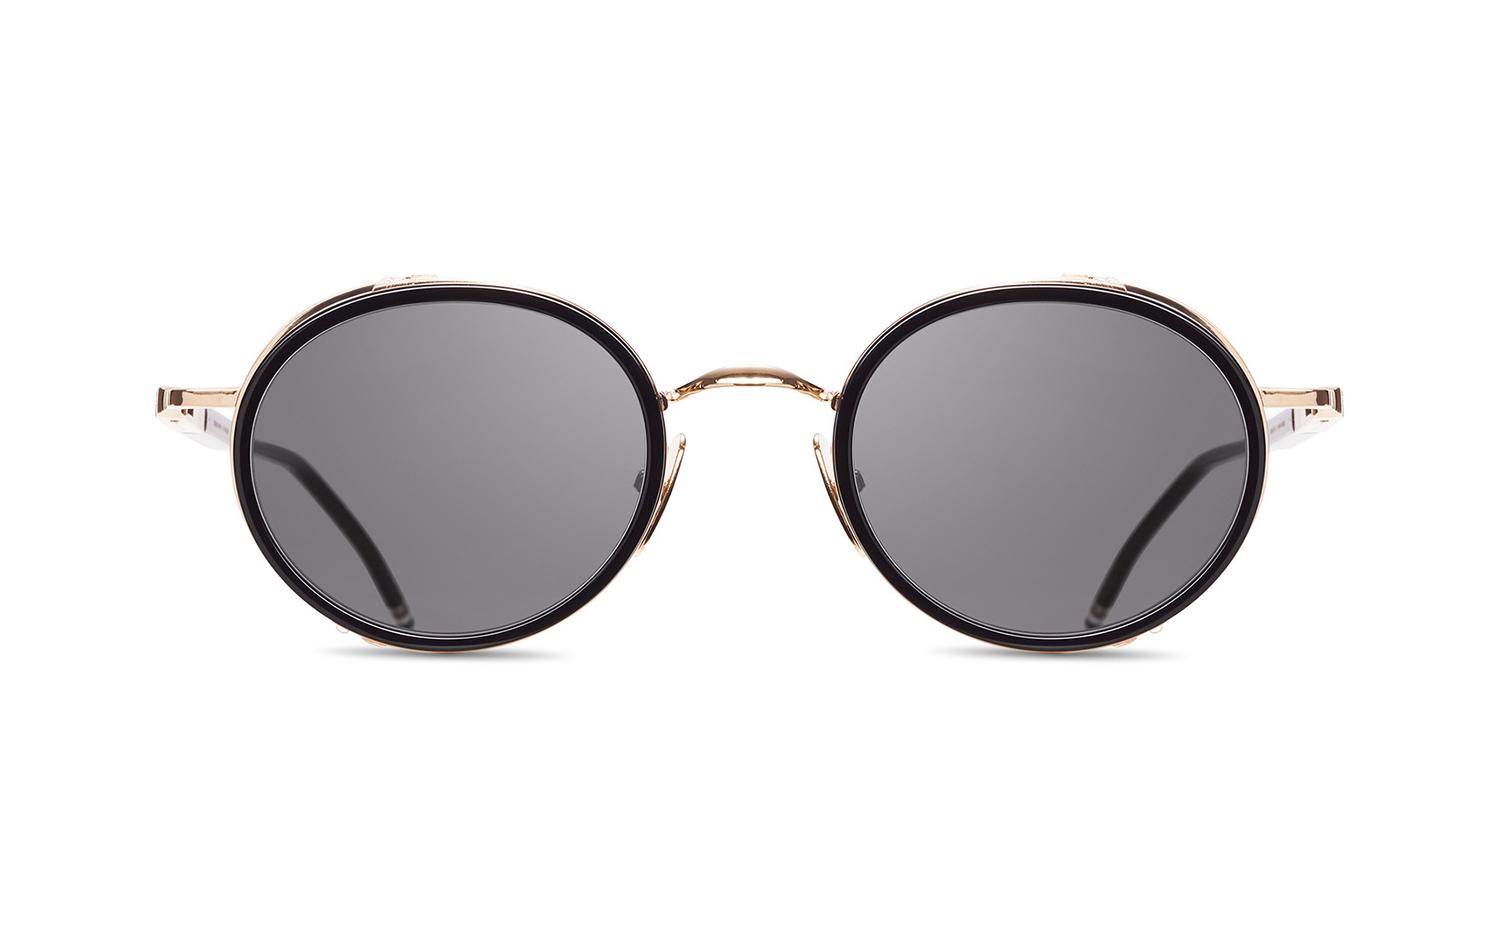 THOMBROWNETHOM BROWNE TBS813-49-01 BLK-GLD